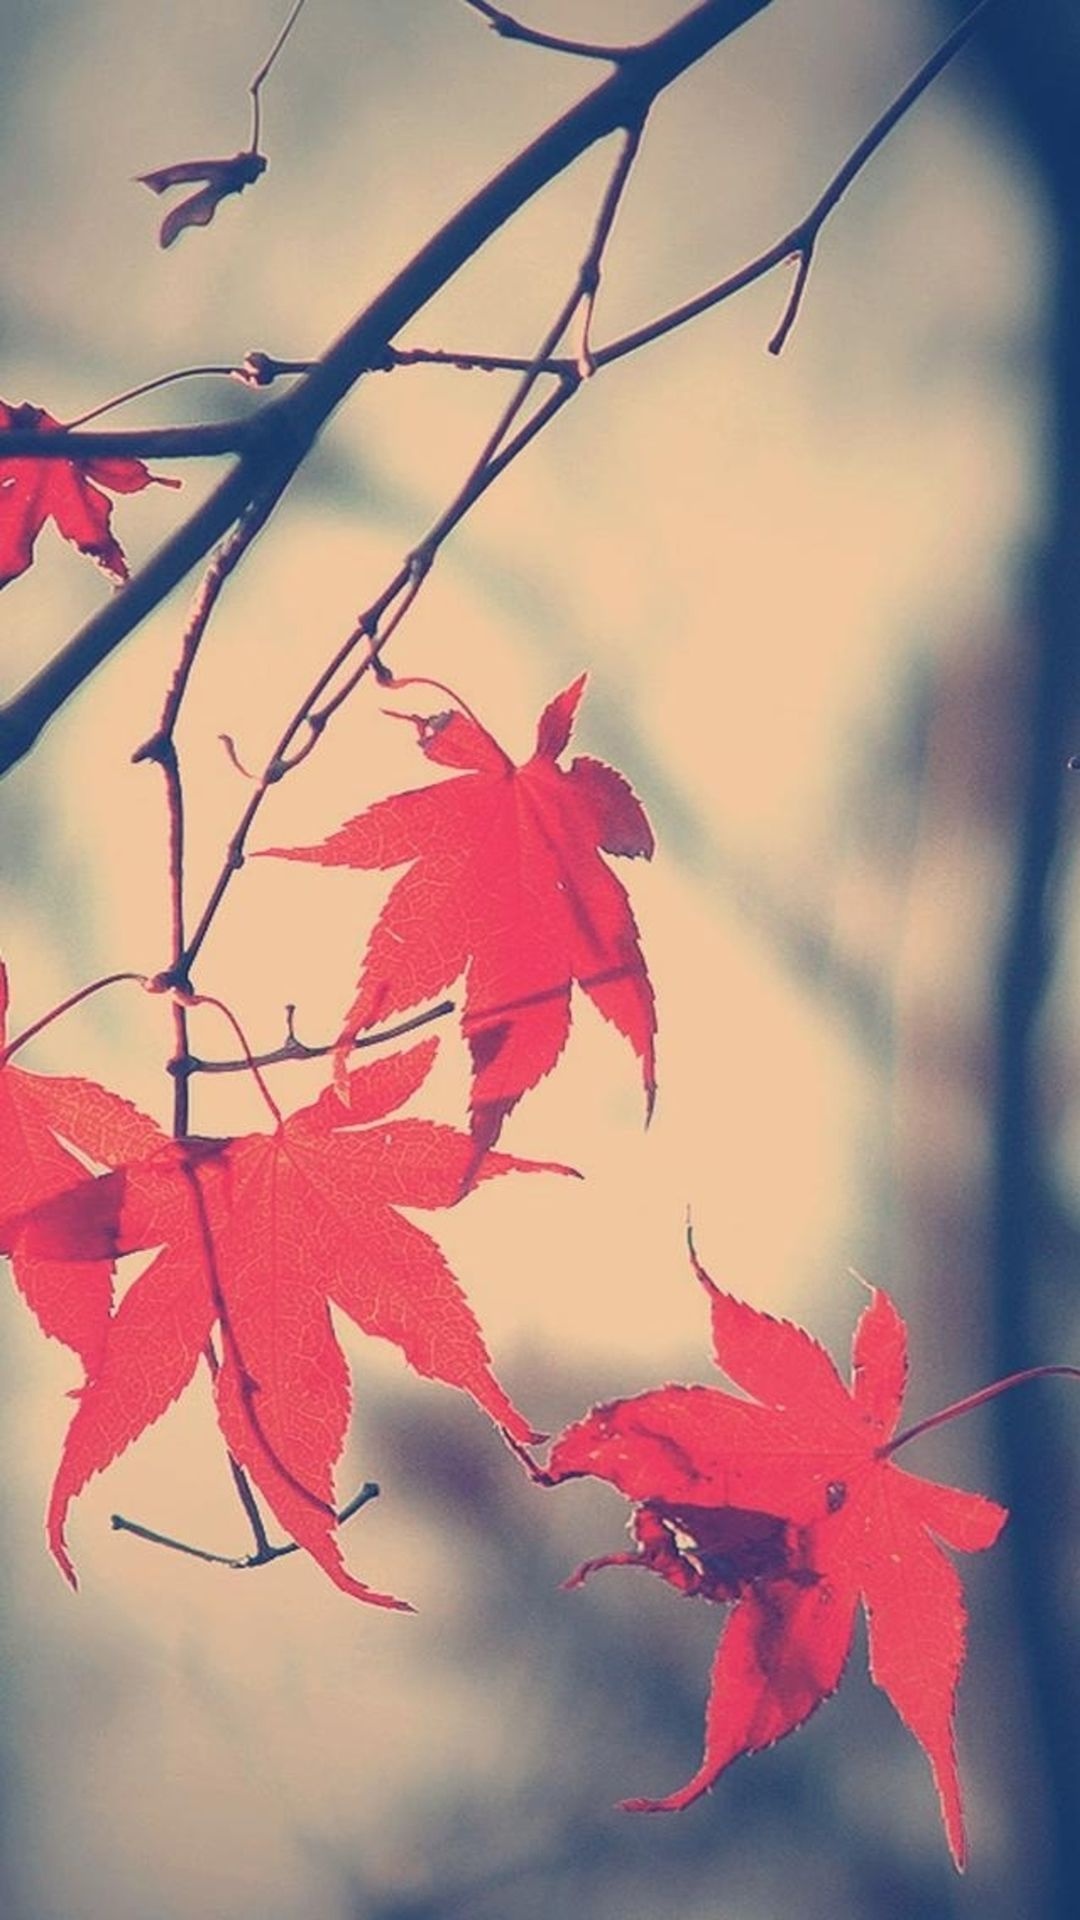 Maple leaf branch, Autumn romance, Whispers of love, Nature's embrace, 1080x1920 Full HD Phone